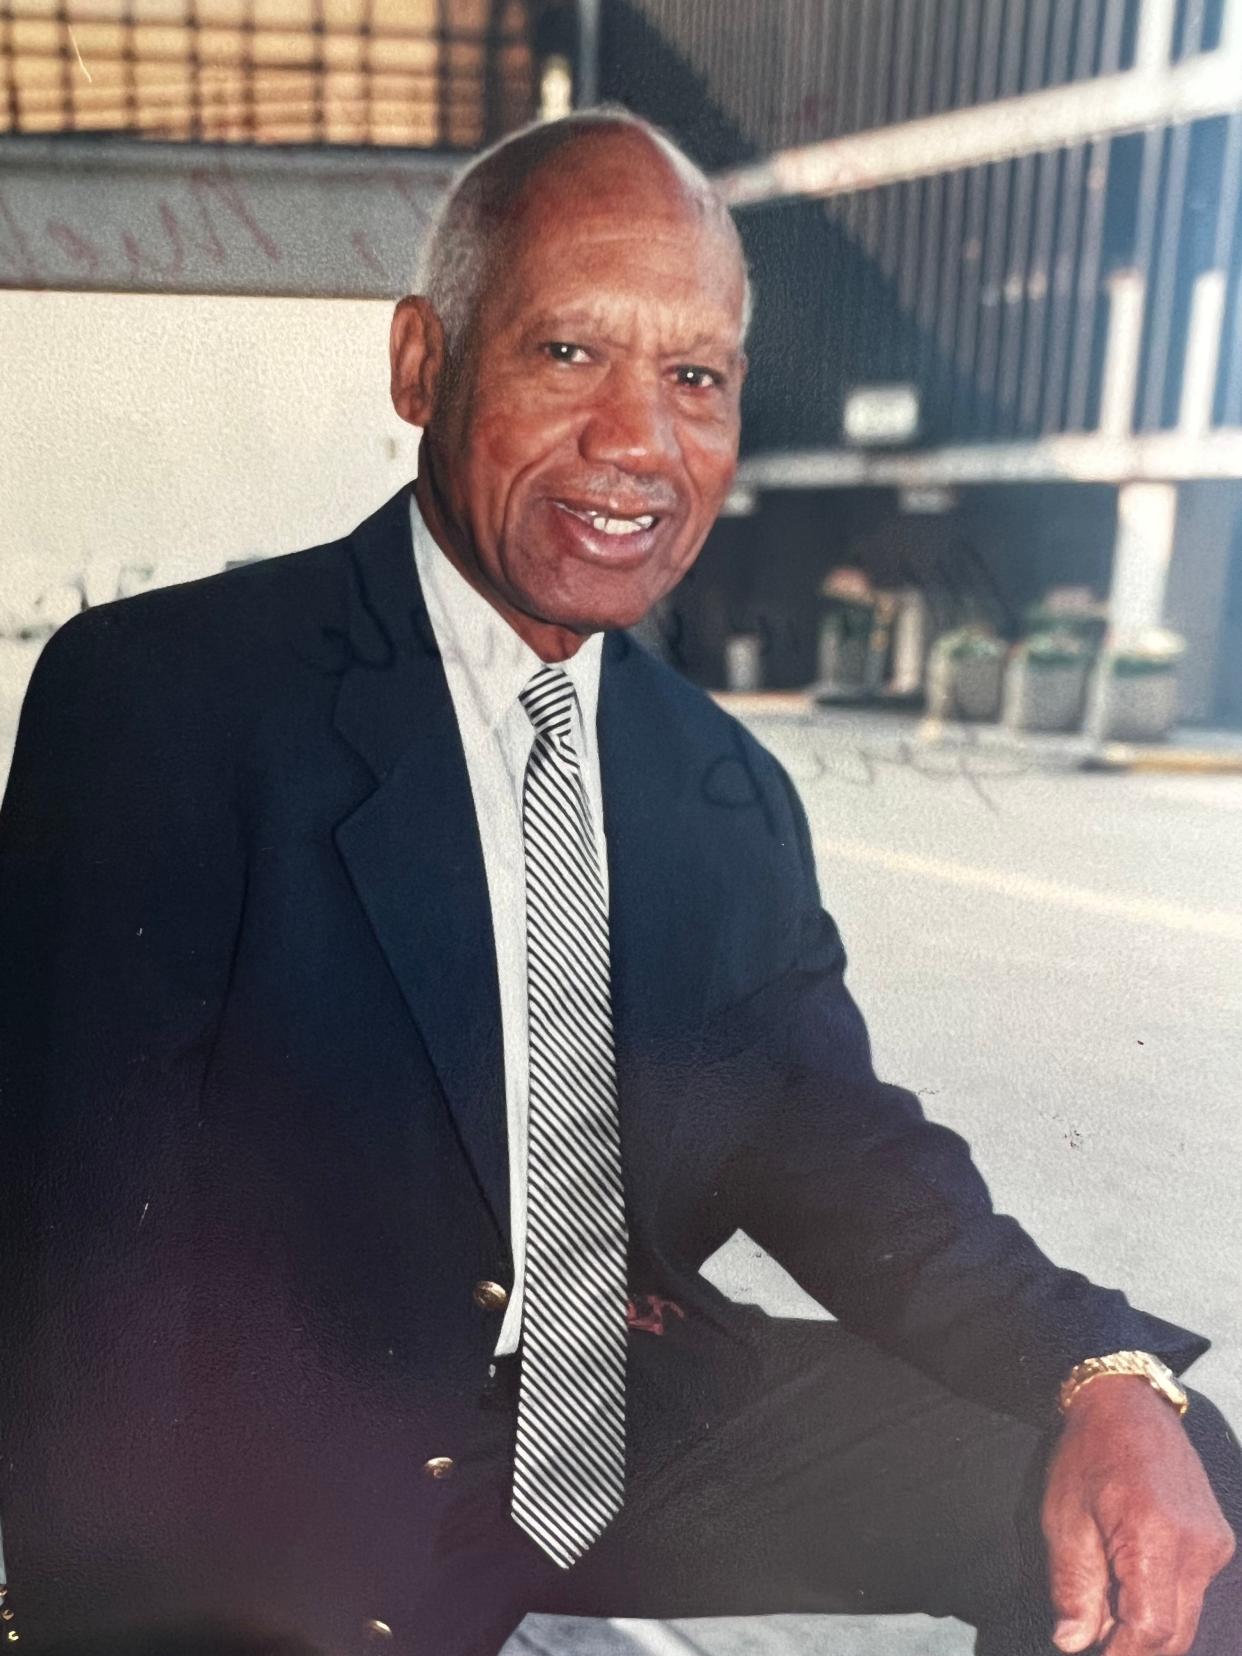 Tuggle worked for nearly four decades in education as a teacher, counselor, coach and administrator. He served Cincinnati Public Schools from 1954 to 1990.